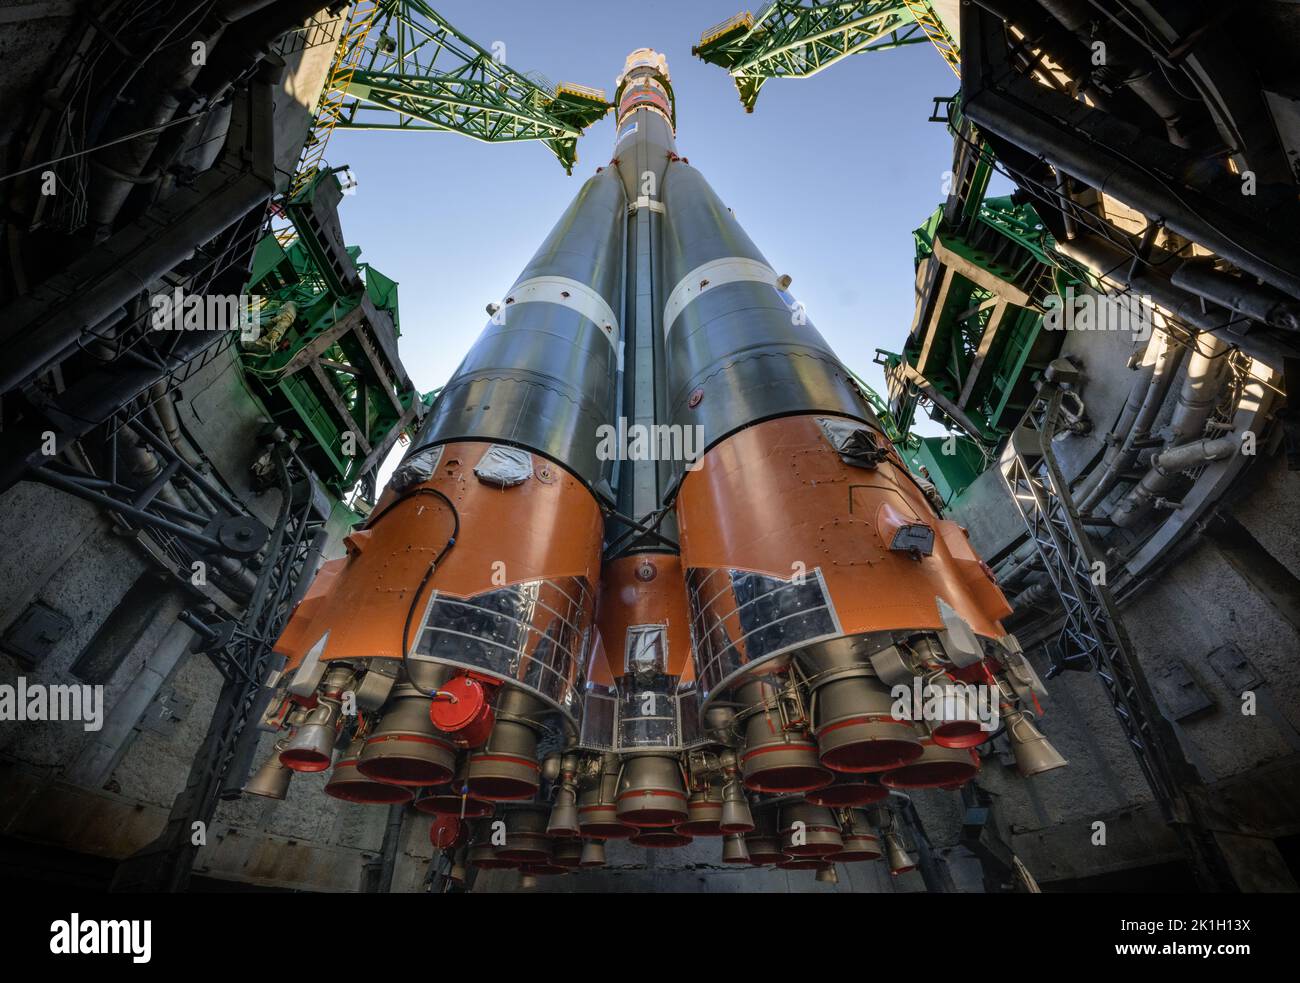 Baikonur, Kazakhstan. 18th Sep, 2022. The Russian Soyuz MS-22 spacecraft and booster rocket are raised vertical after having rolled out by train at launch pad 31 of the Baikonur Cosmodrome, September 18, 2022 in Baikonur, Kazakhstan. International Space Station Expedition 68 crew members astronaut Frank Rubio of NASA, and cosmonauts Sergey Prokopyev and Dmitri Petelin of Roscosmos are set to launch September 21st to the orbiting laboratory. Credit: Bill Ingalls/NASA/Alamy Live News Stock Photo